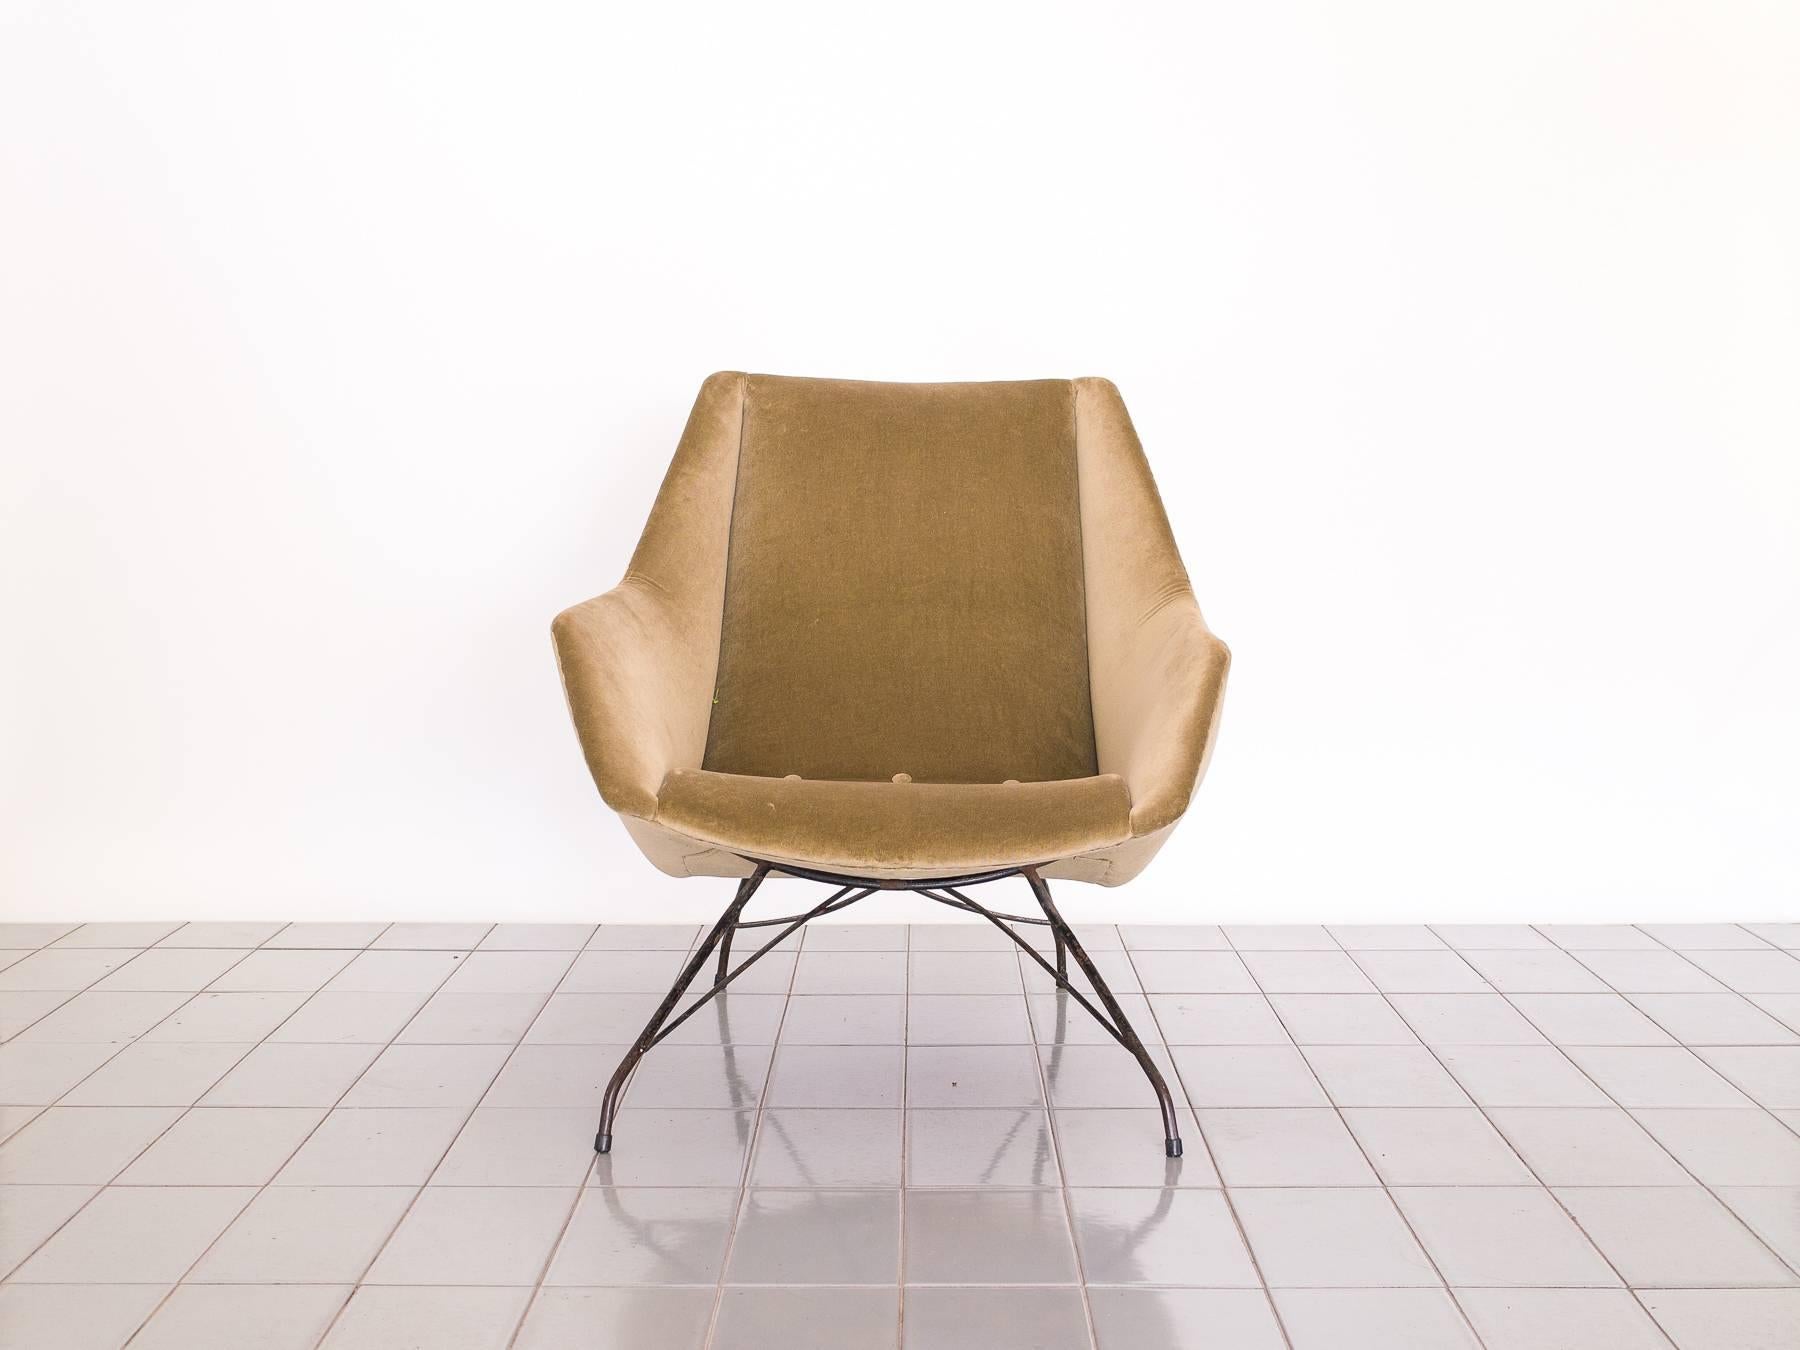 Super rare low seat lounger by Eisler & Hauner, produced in Iron, with velvet upholstery. This version has springed seats and the back legs are extra low and long. Produced by Móveis Artesanal in the mid-1950s.